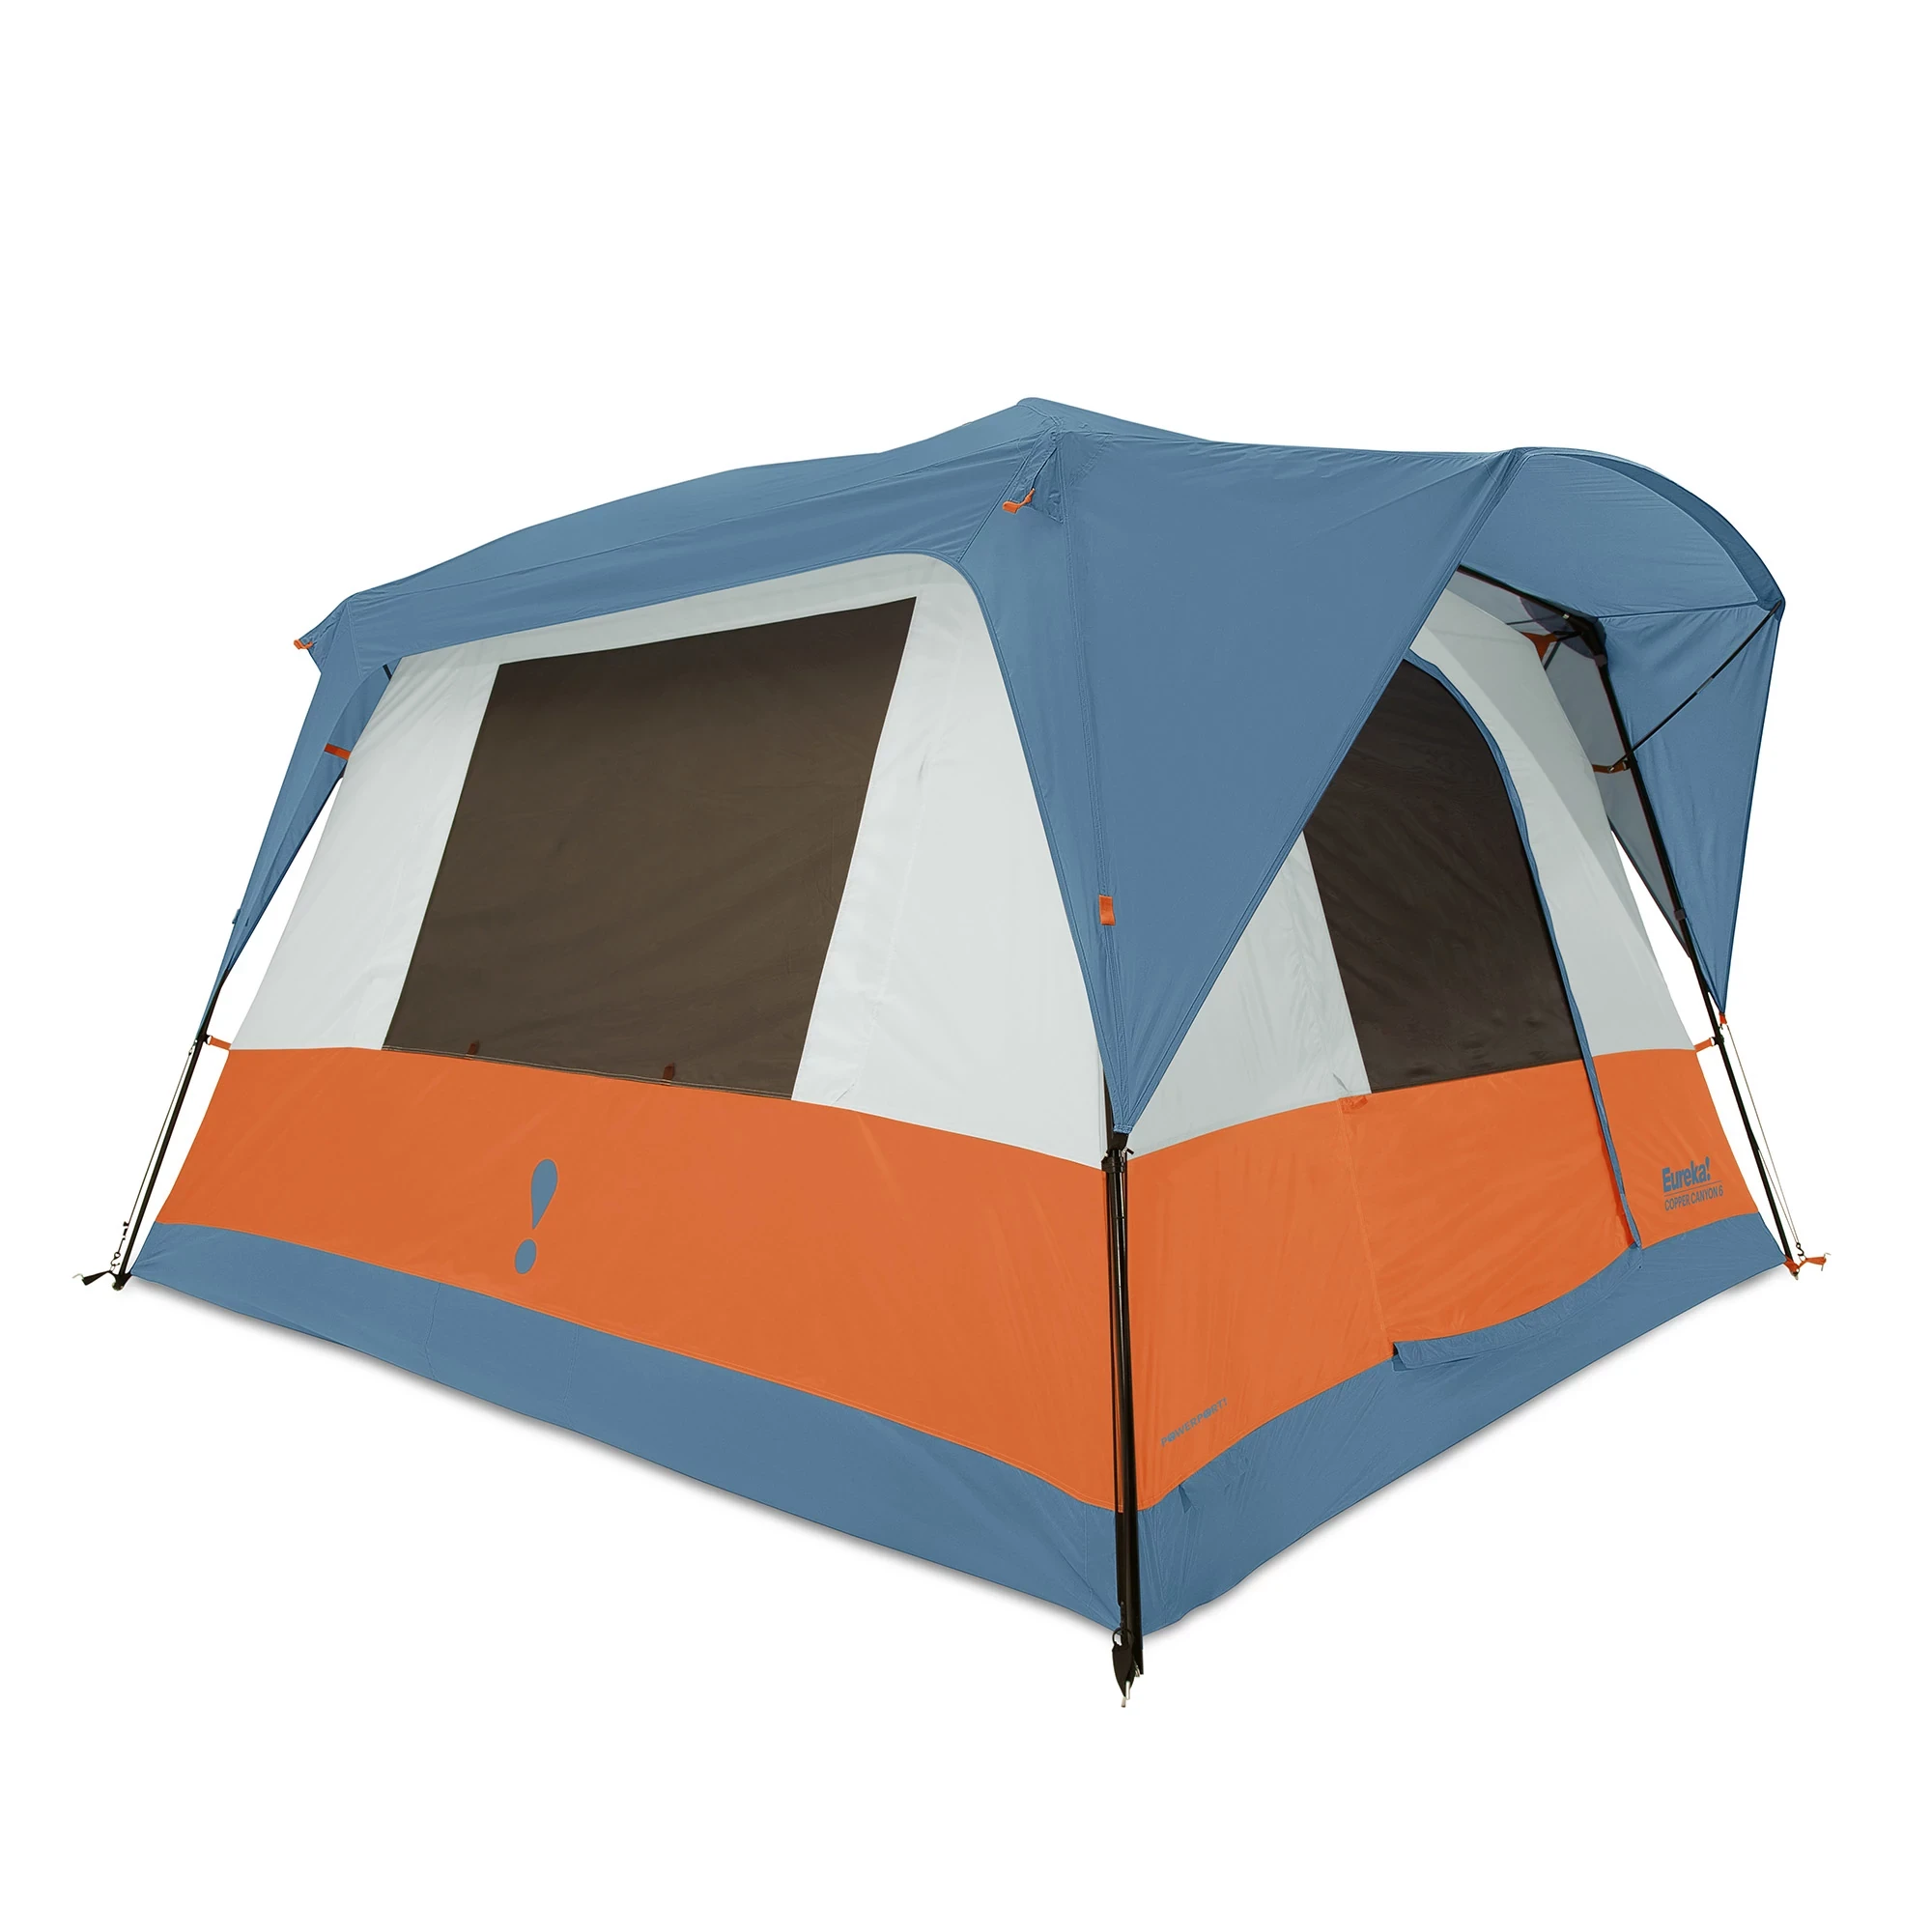 Copper Canyon LX 6 Tent with rainfly and window closed